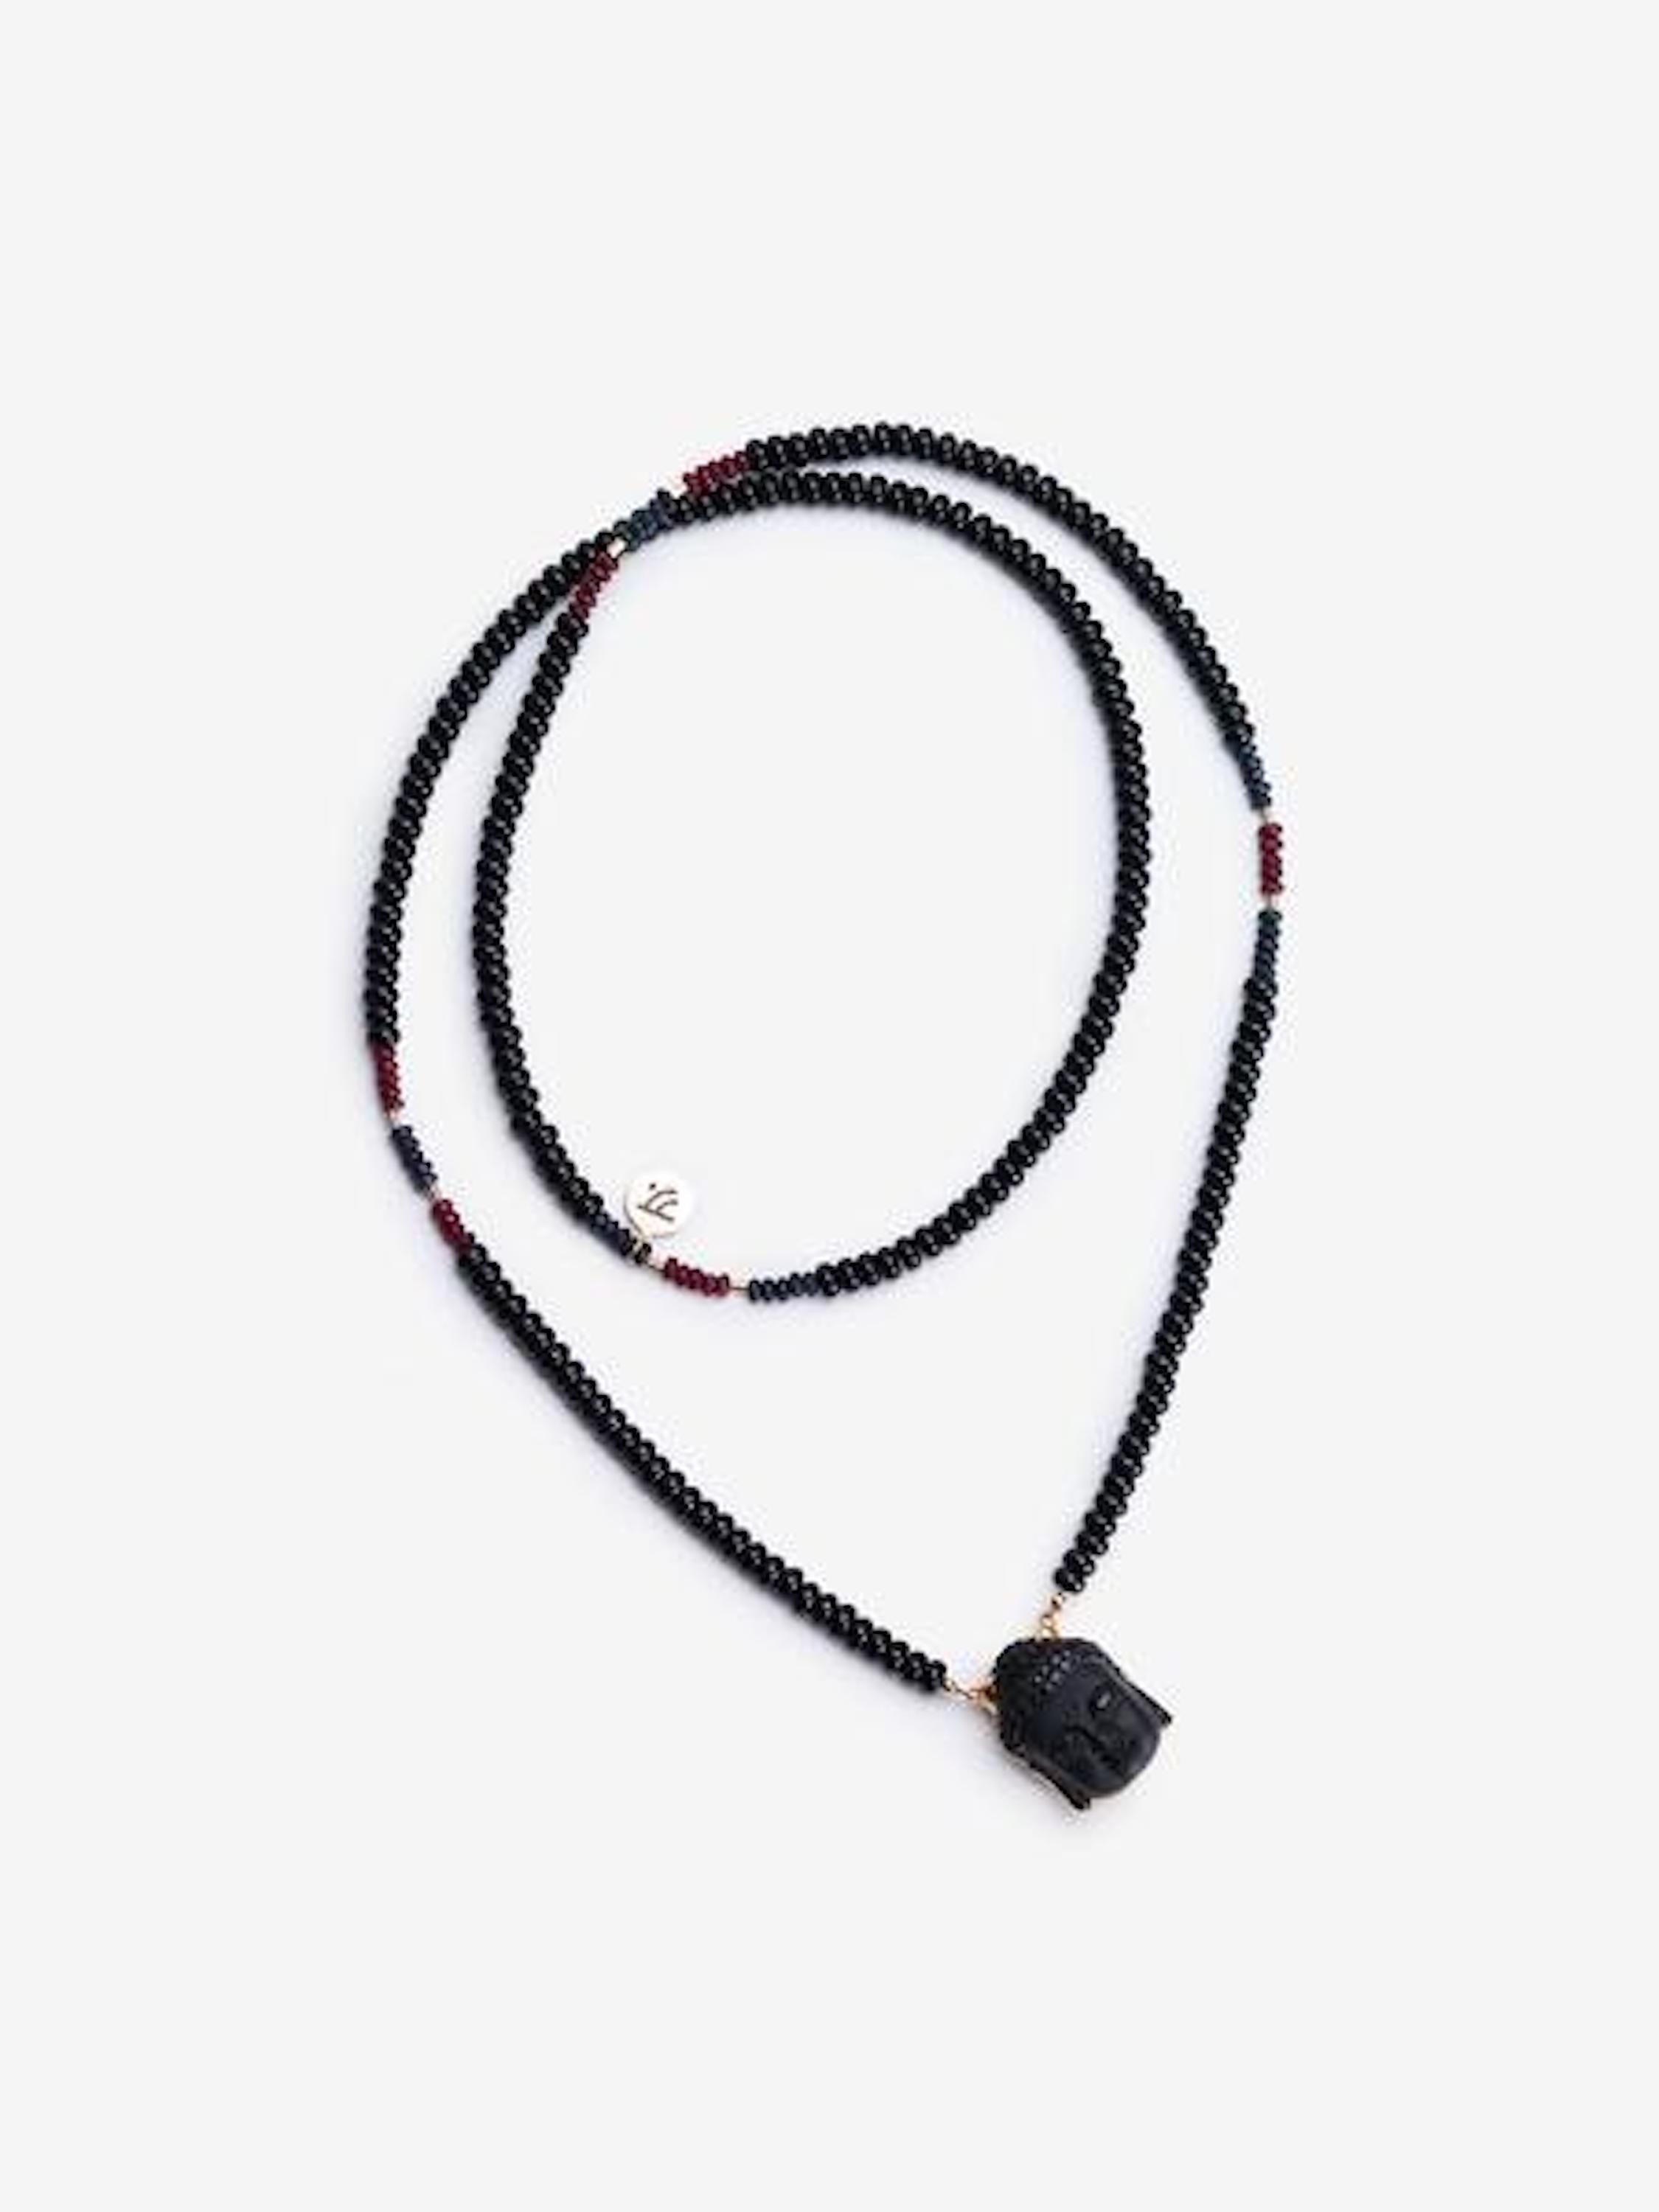 Onyx is a perfect stone to protect you and also gives you courage to move on. The obsidian buddha pendant represent peace-of-mind and enlightenment. The combination of the stones is perfect to overcome loss and move forward.

Materials
Onyx, Black